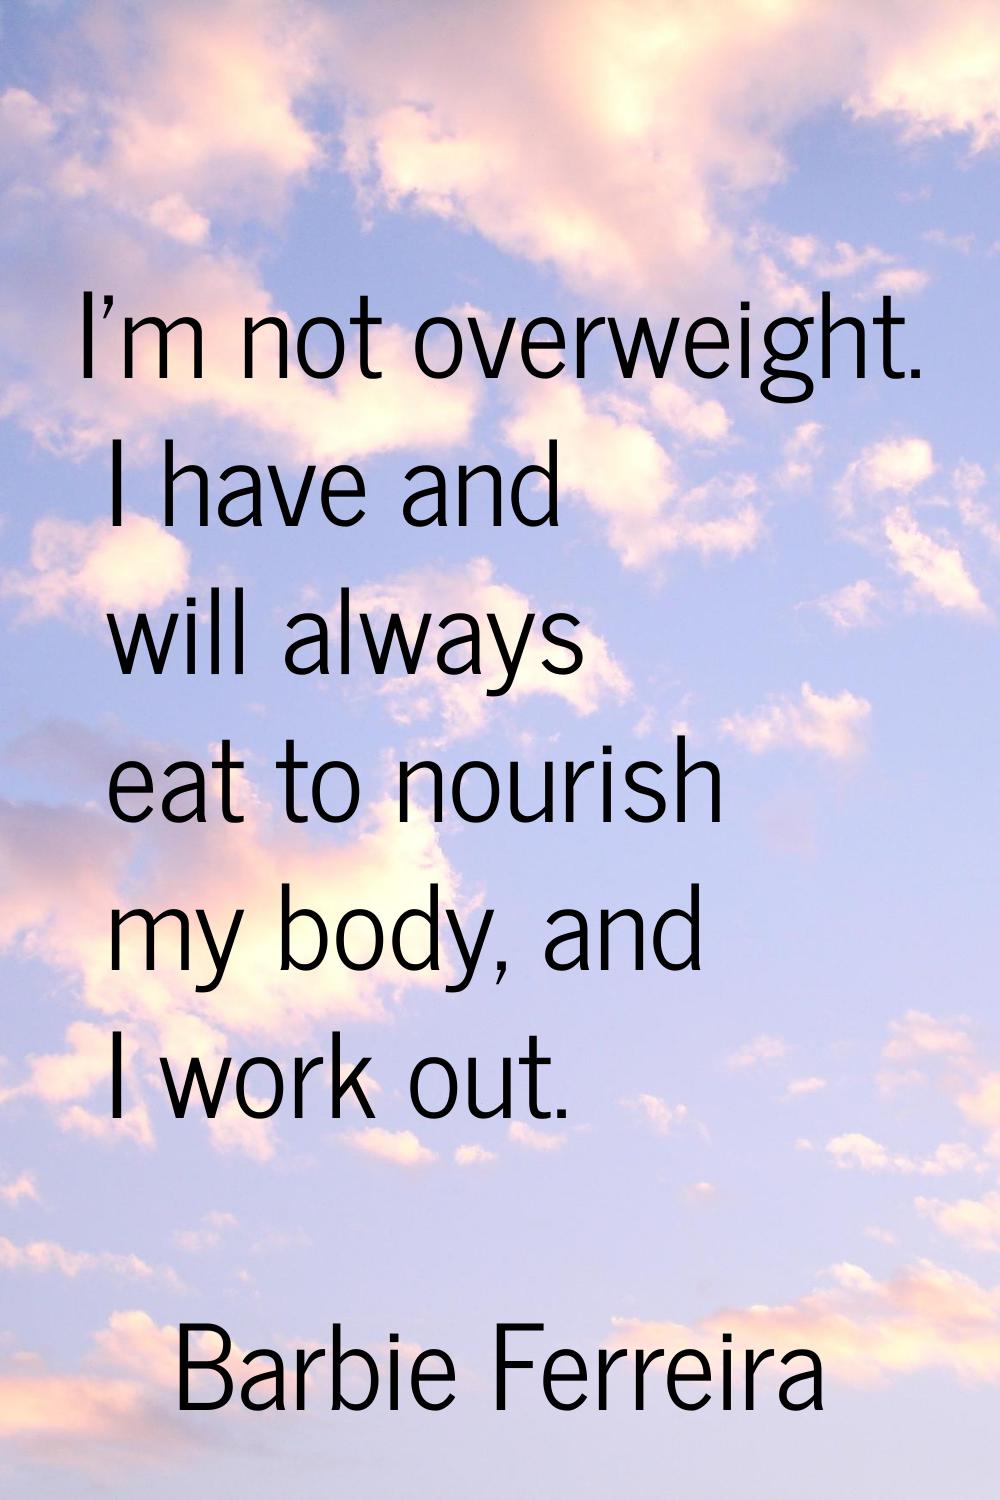 I'm not overweight. I have and will always eat to nourish my body, and I work out.